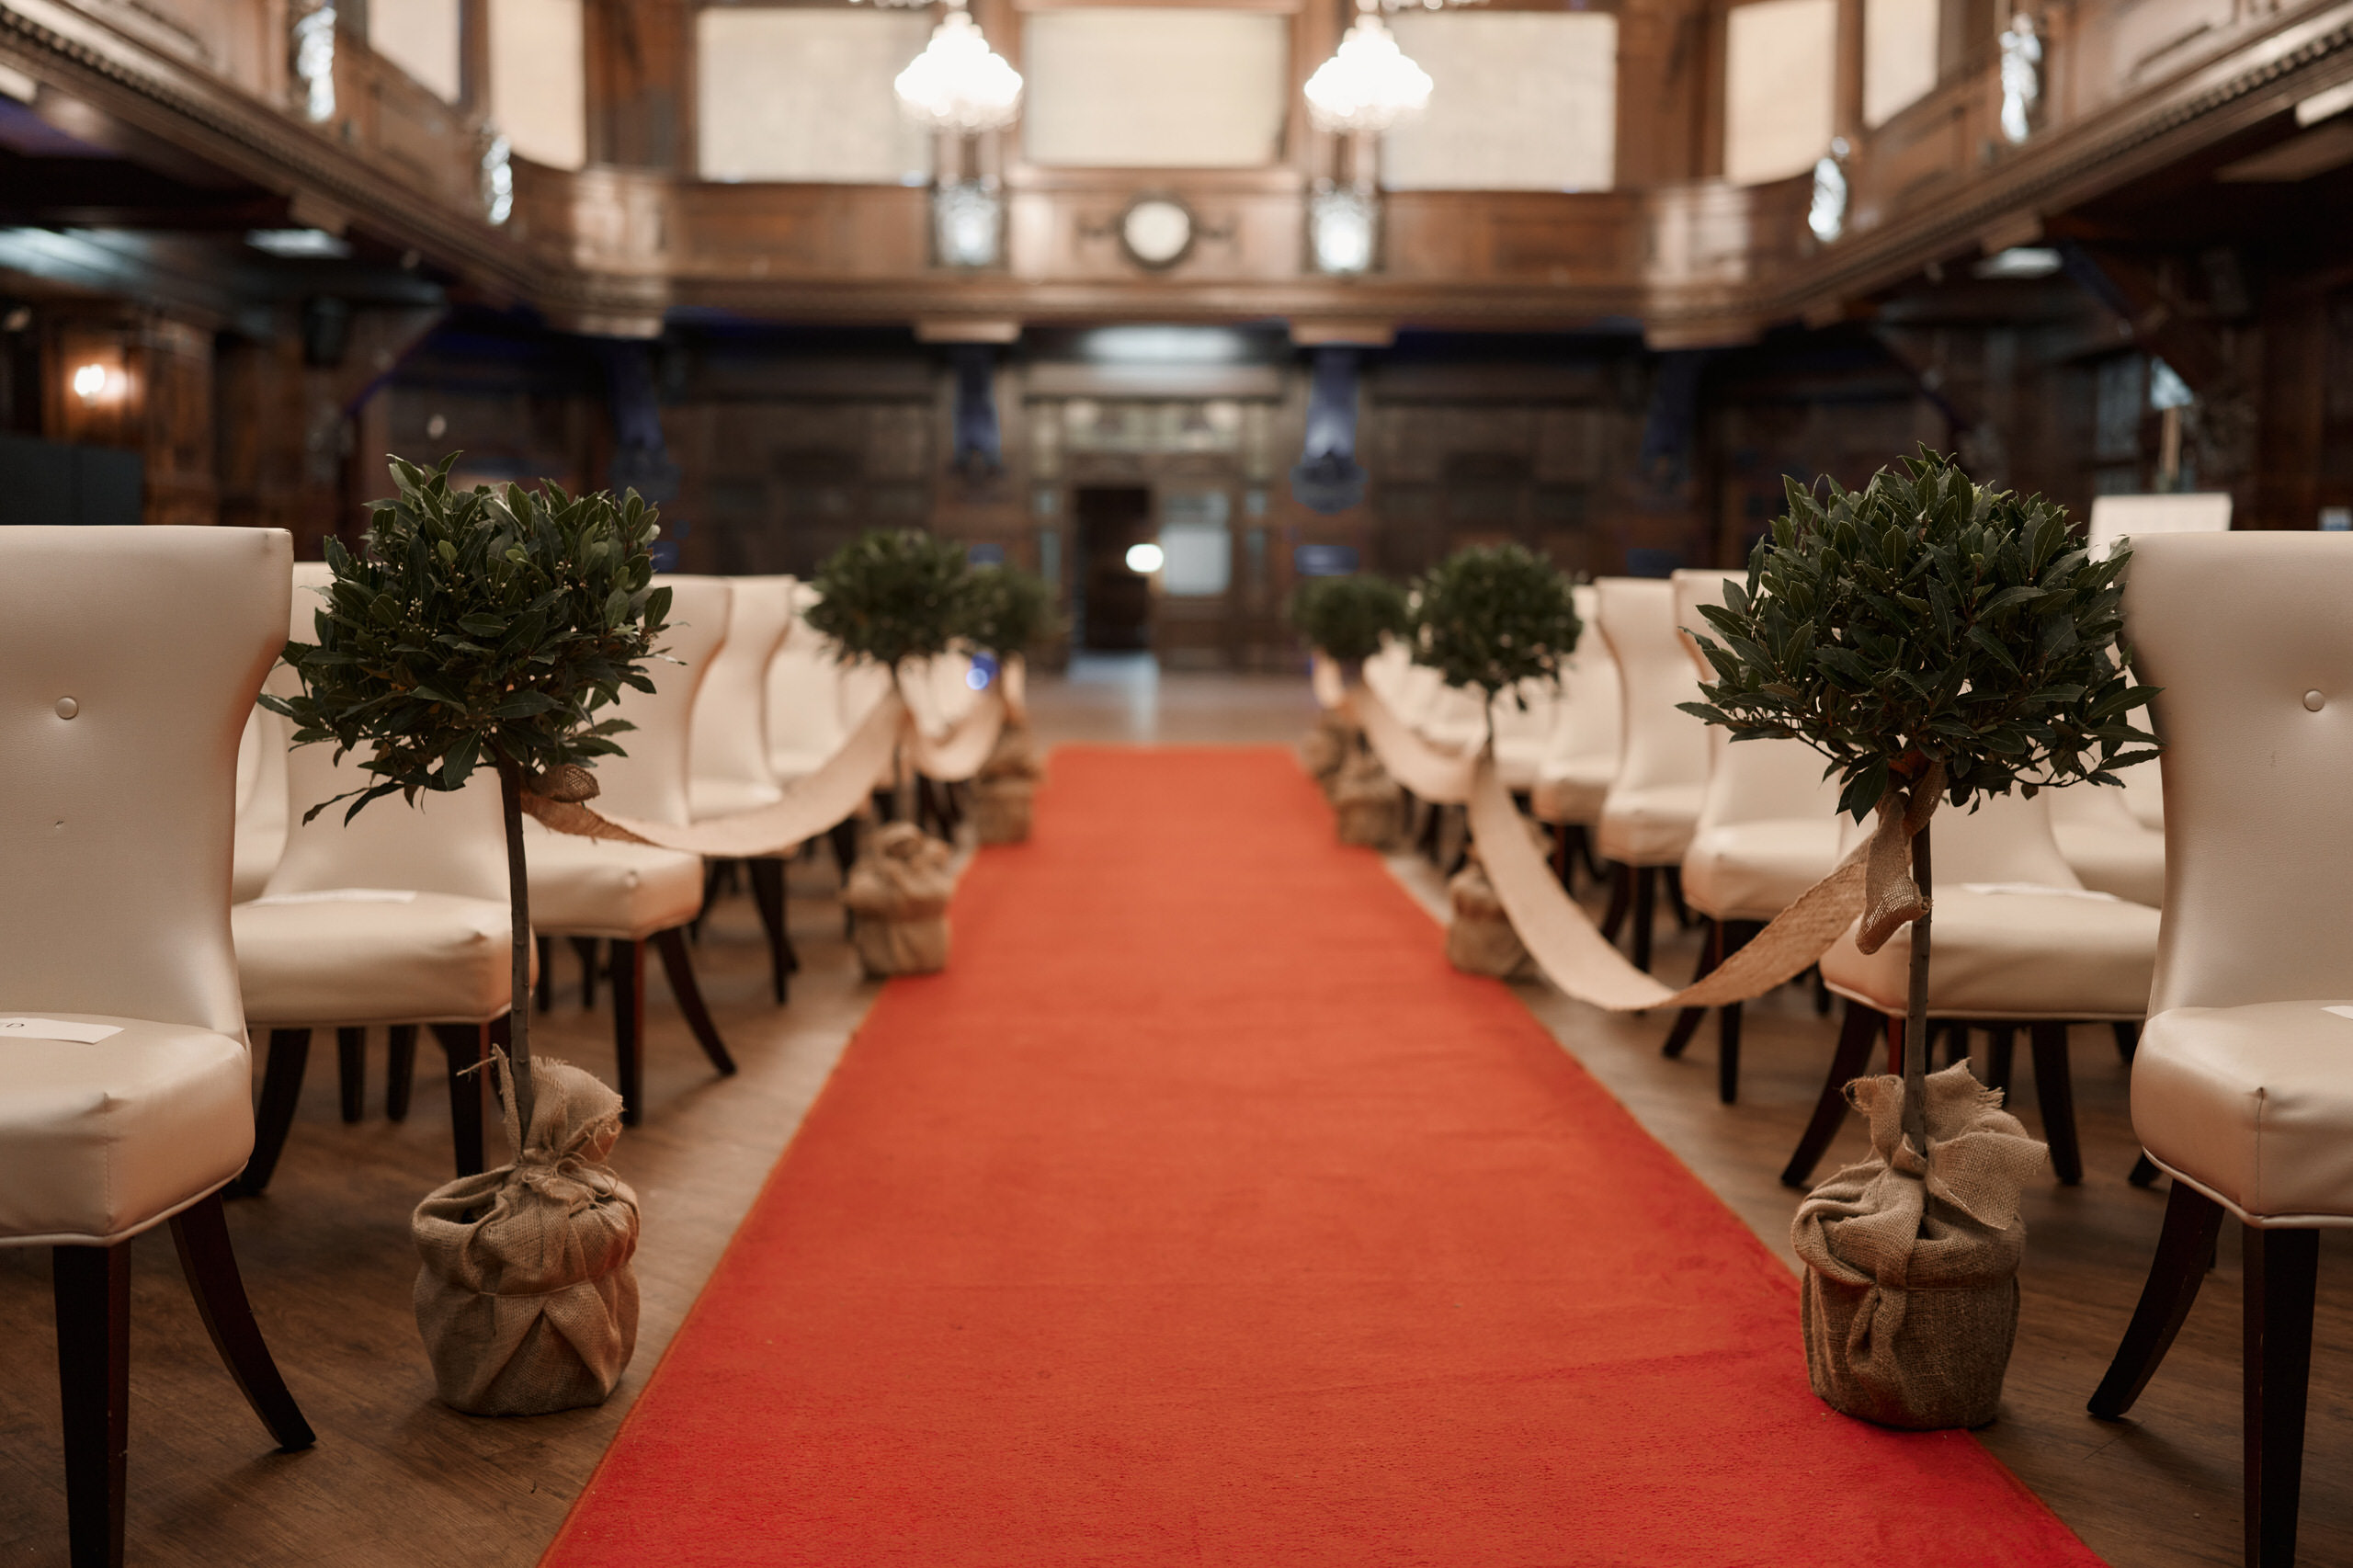 A big room with a red carpet where a wedding is taking place.